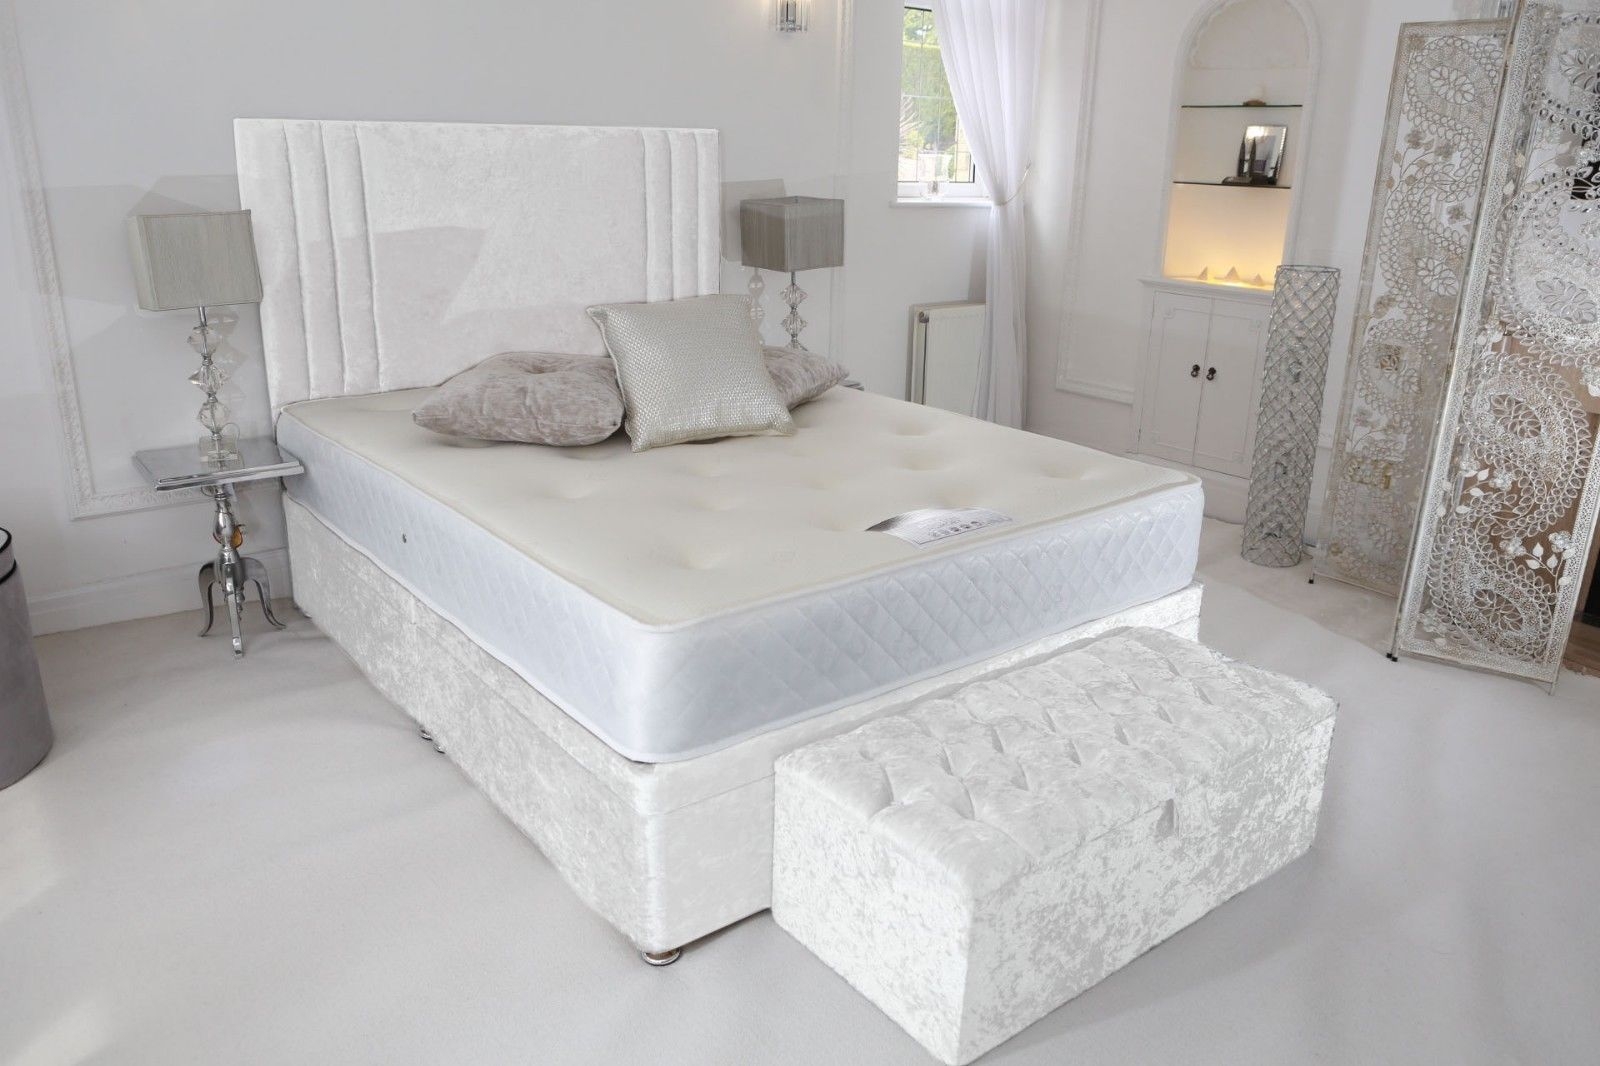 BedsDivans – Crushed Velvet Divan Bed – White – Single, Small Double, Double, King & Super King Sizes Available – Add Headboard & Mattress